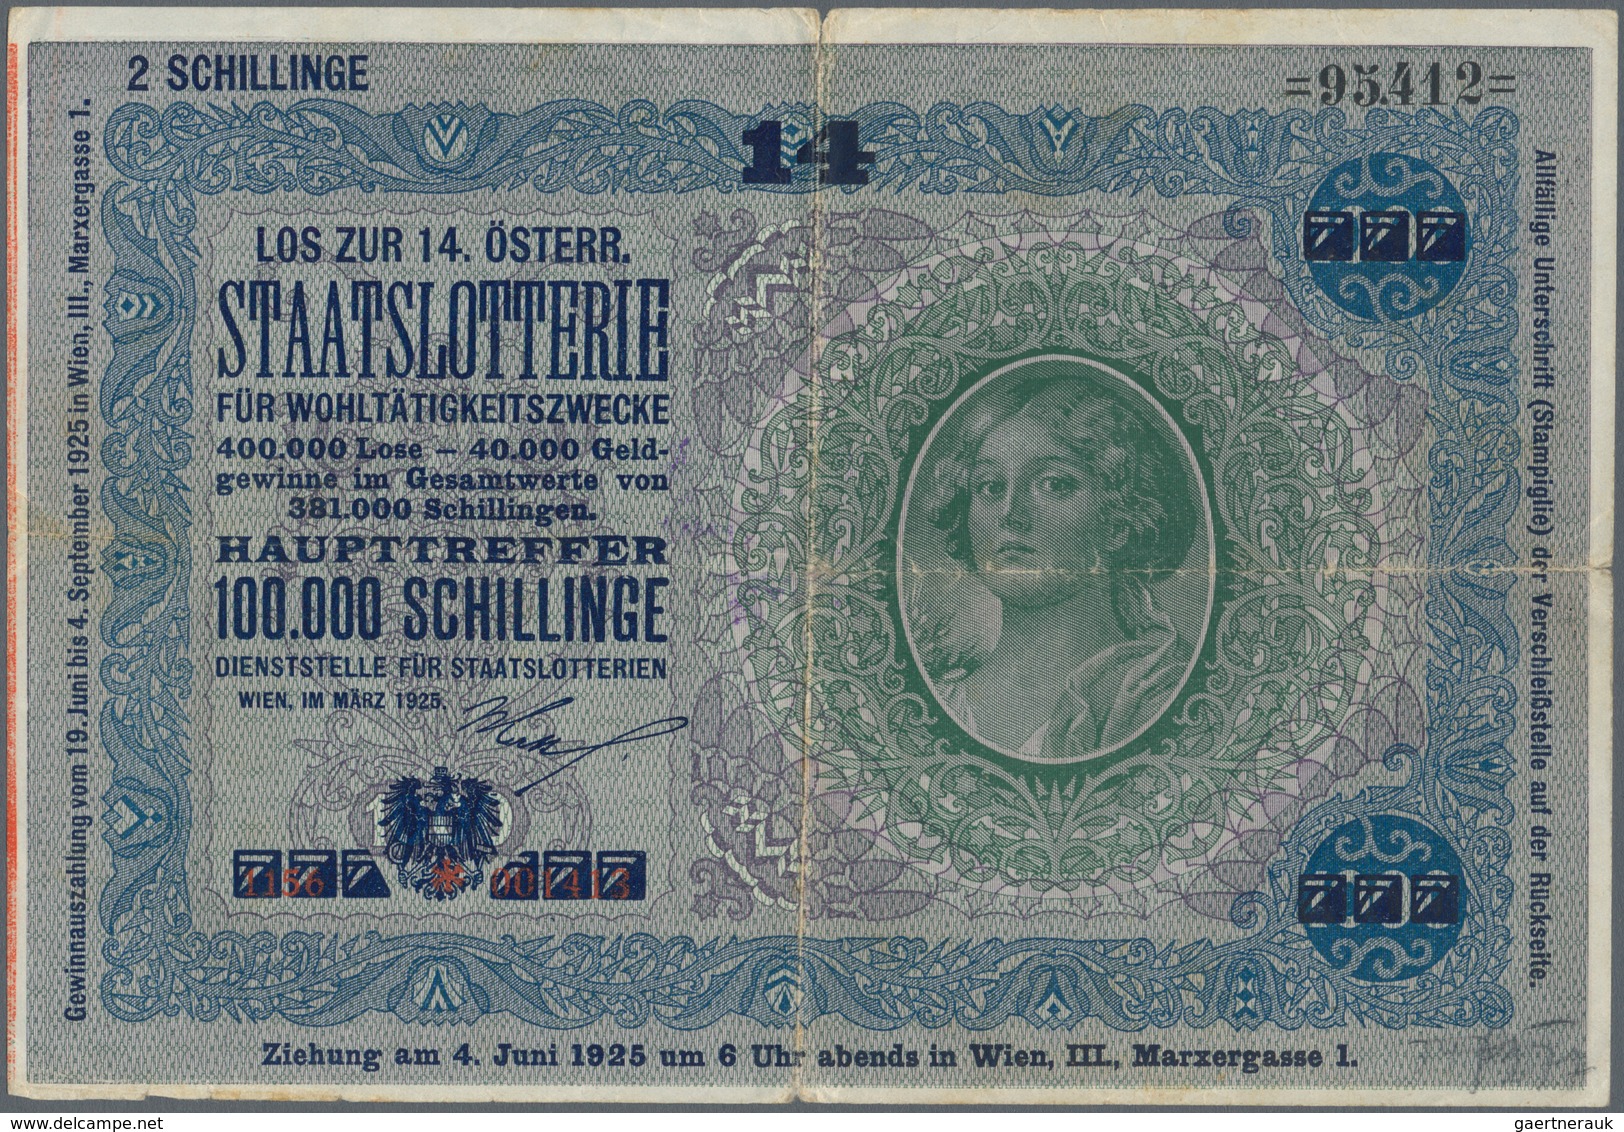 Austria / Österreich: Donaustaat With Lottery Overprint On 1000 Schilling 1925 P. S155b, After WWI T - Austria